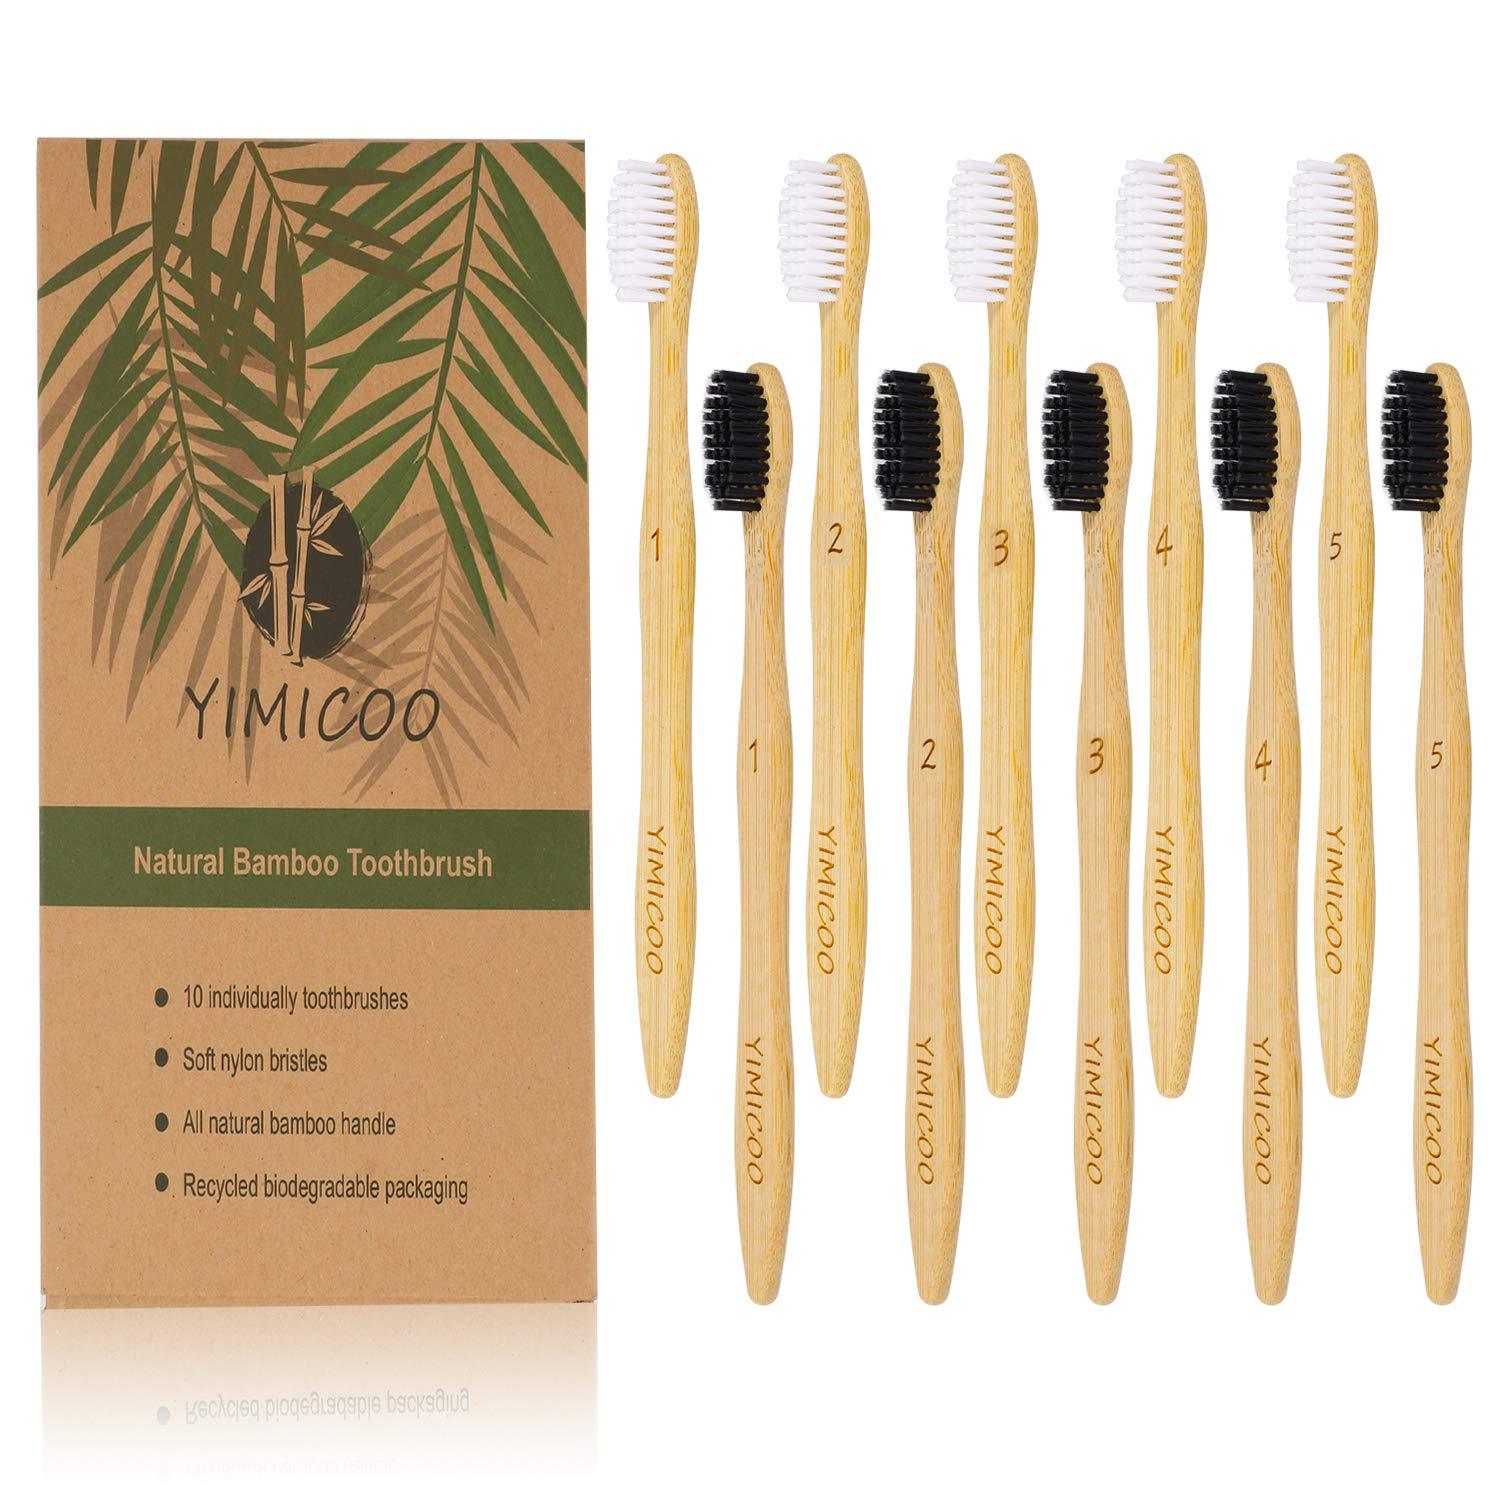 Charcoal Bamboo Toothbrush, YIMICOO Biodegradable Natural Organic Toothbrushes Eco Friendly Soft BPA Bristles (Packs Of Black And White Bristles)